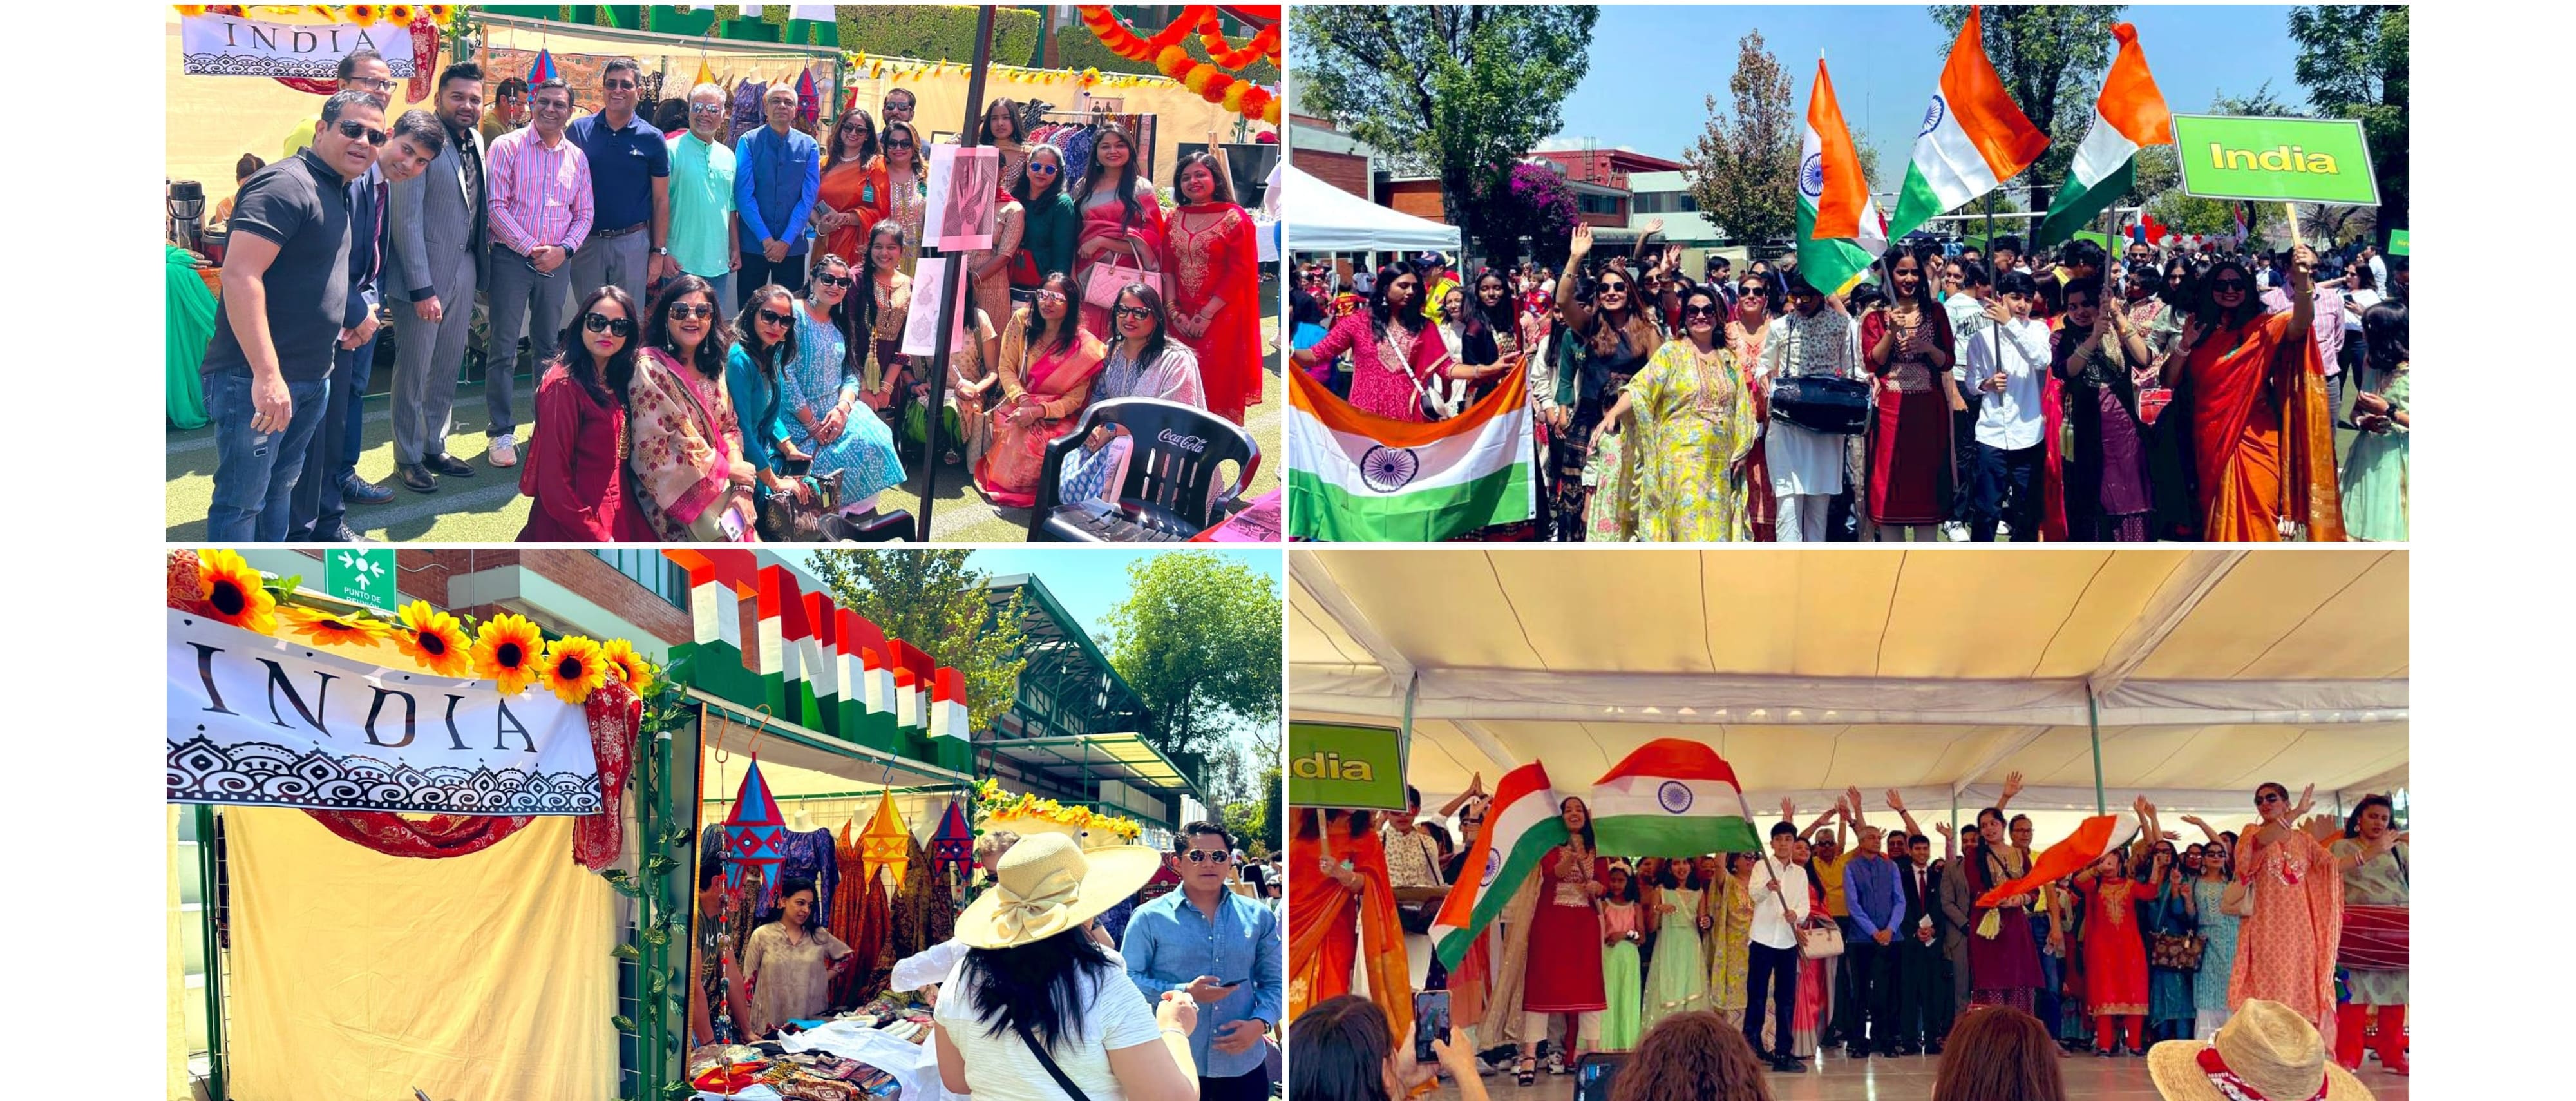  <div style="fcolor: #fff; font-weight: 600; font-size: 1.5em;">
<p style="font-size: 13.8px;">
Ambassador Pankaj Sharma and officers from Embassy attended the Greengates School Annual International Fair. 

Amb. visited the India corner & interacted with the diaspora members present on this occasion applauding them for showcasing India at the event. 

<br /><span style="text-align: center;">11 March 2023</span></p>
</div>